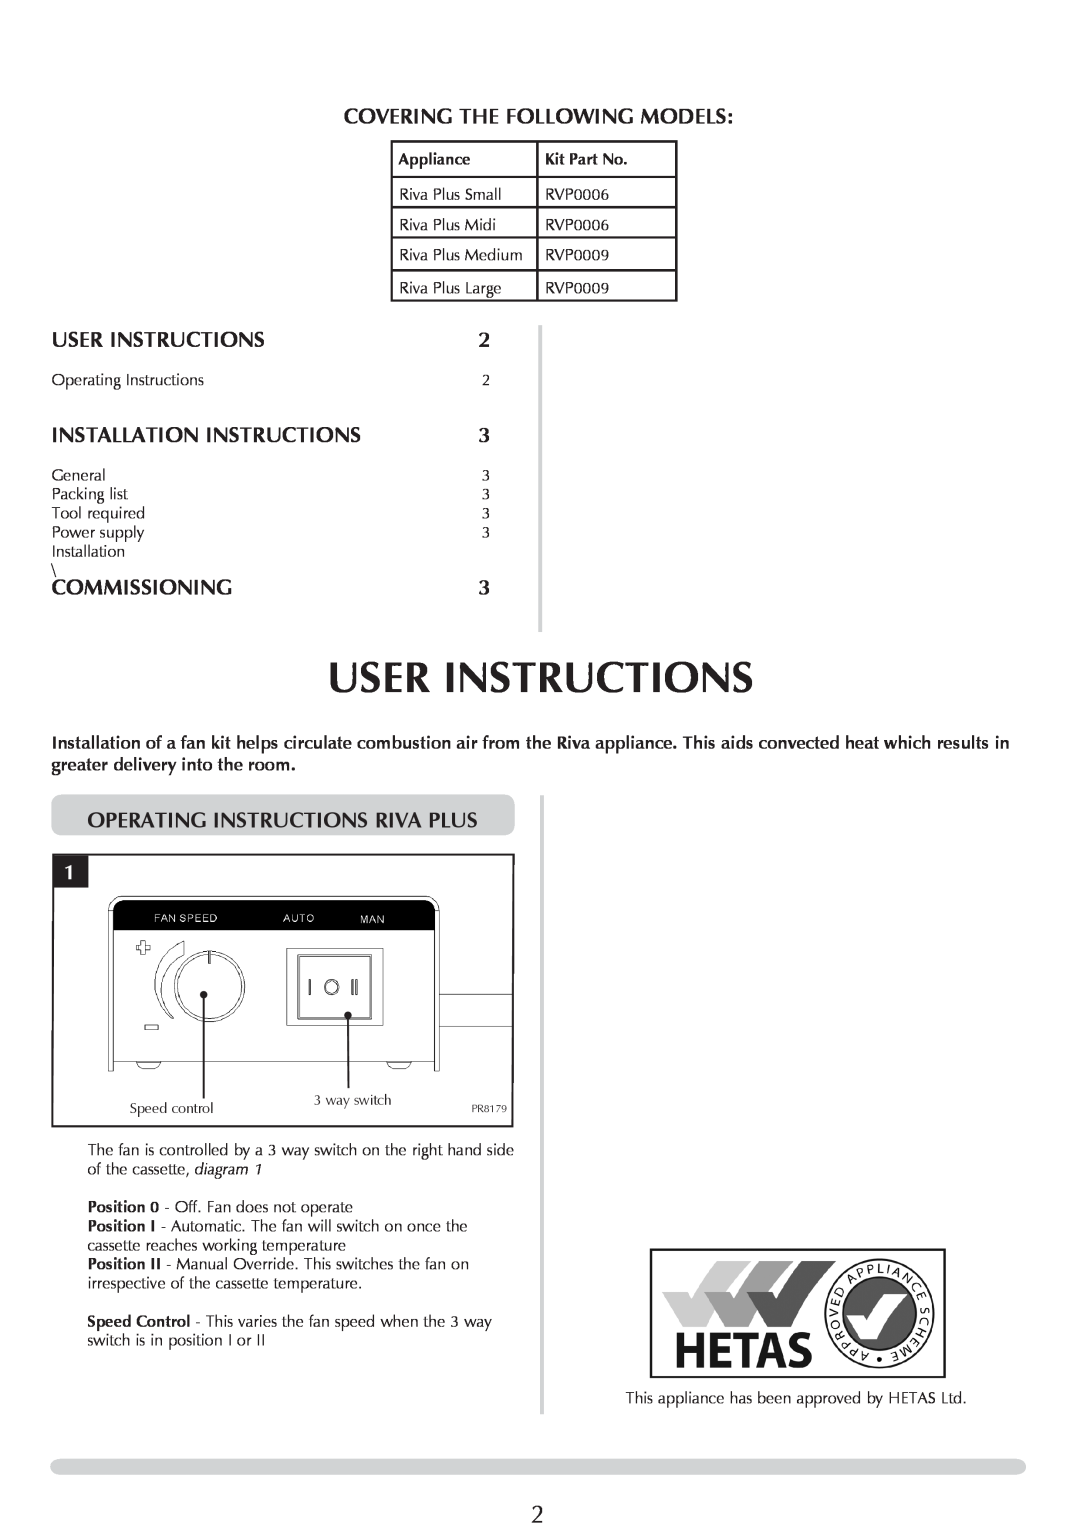 Stovax PM256 manual User Instructions, COVERING THE FOLLOWING Models, Installation Instructions, Commissioning 